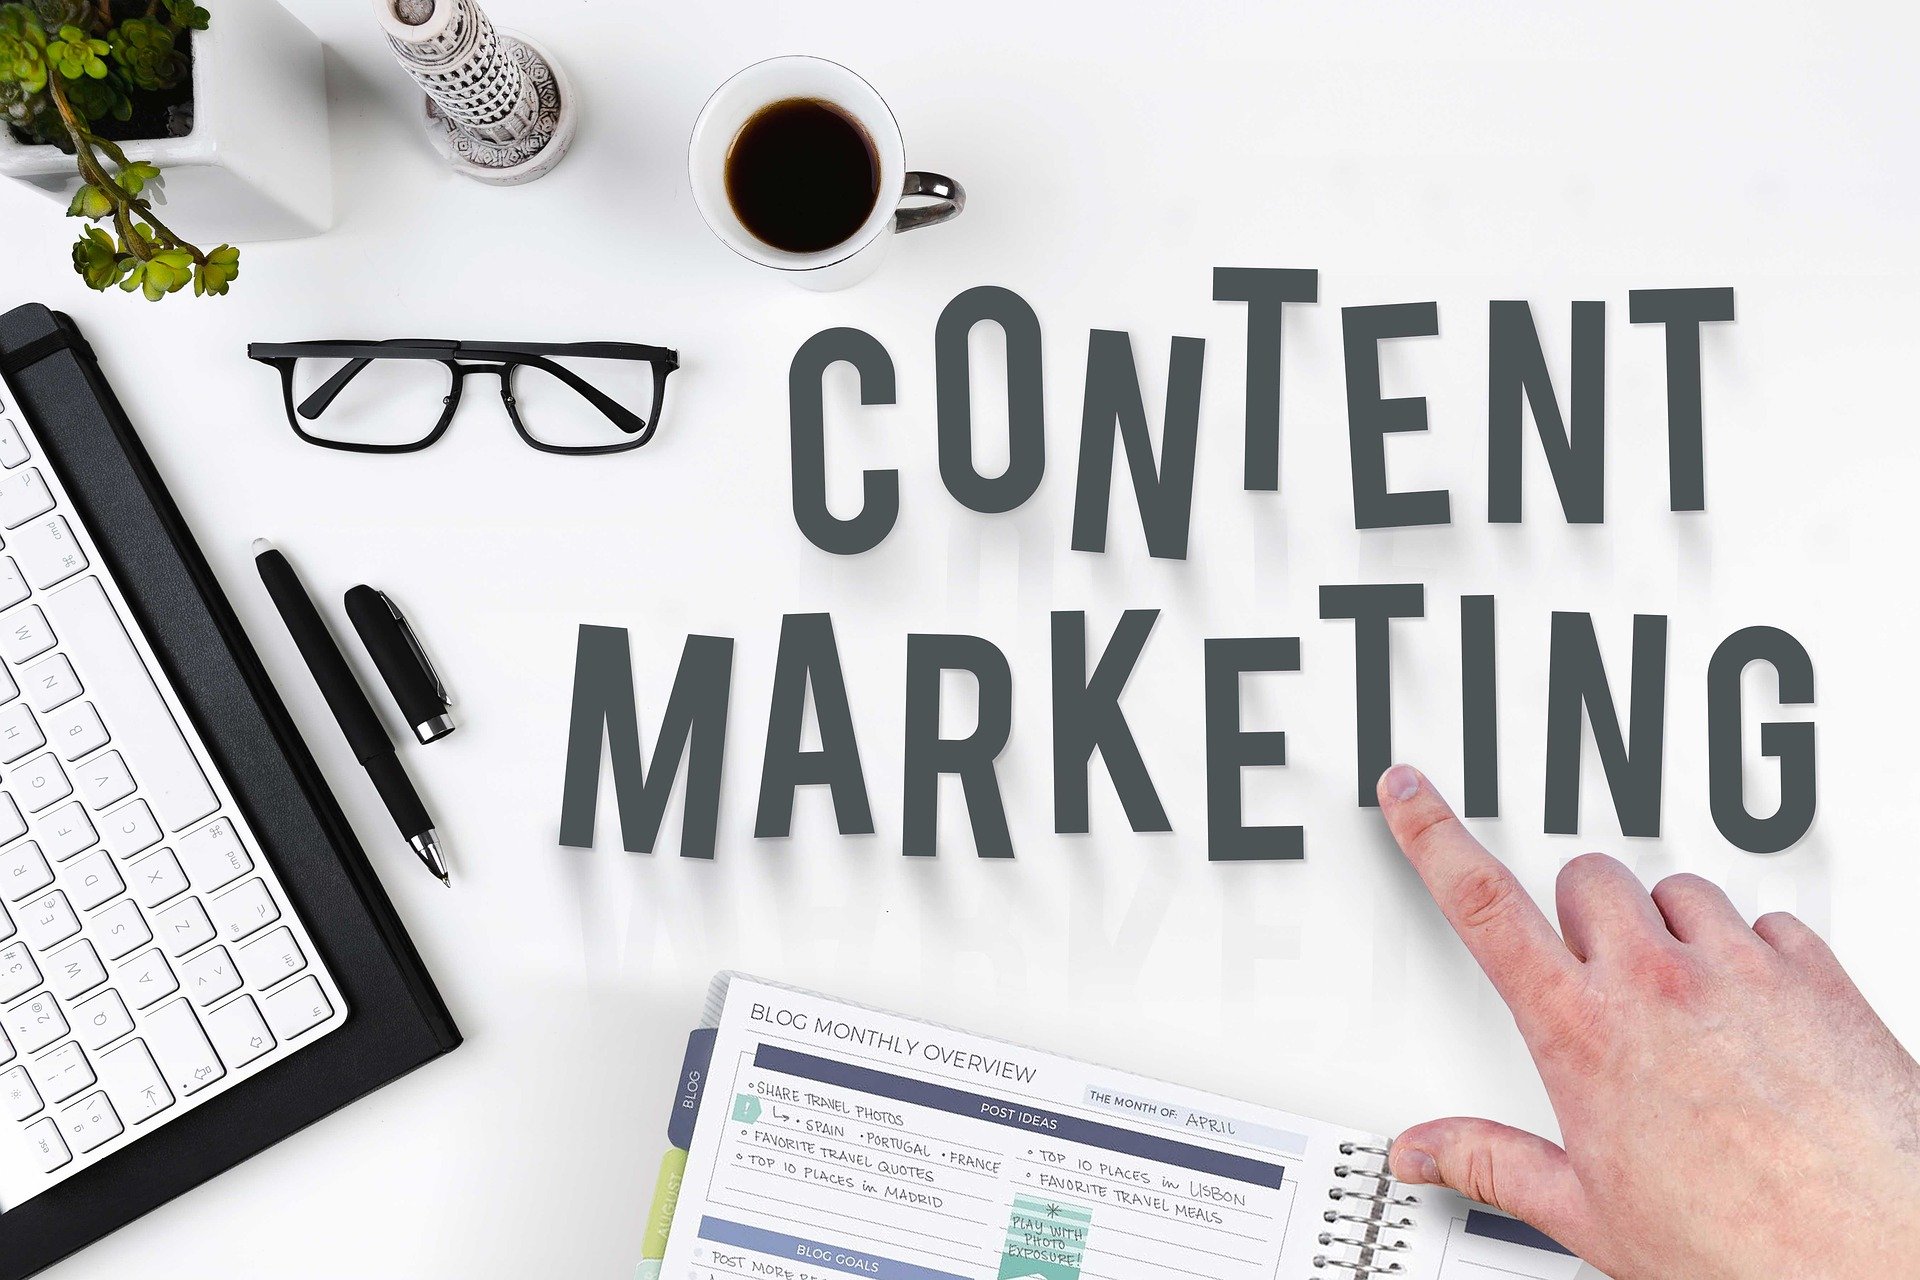 5 B2B Content Marketing Ideas for Manufacturers